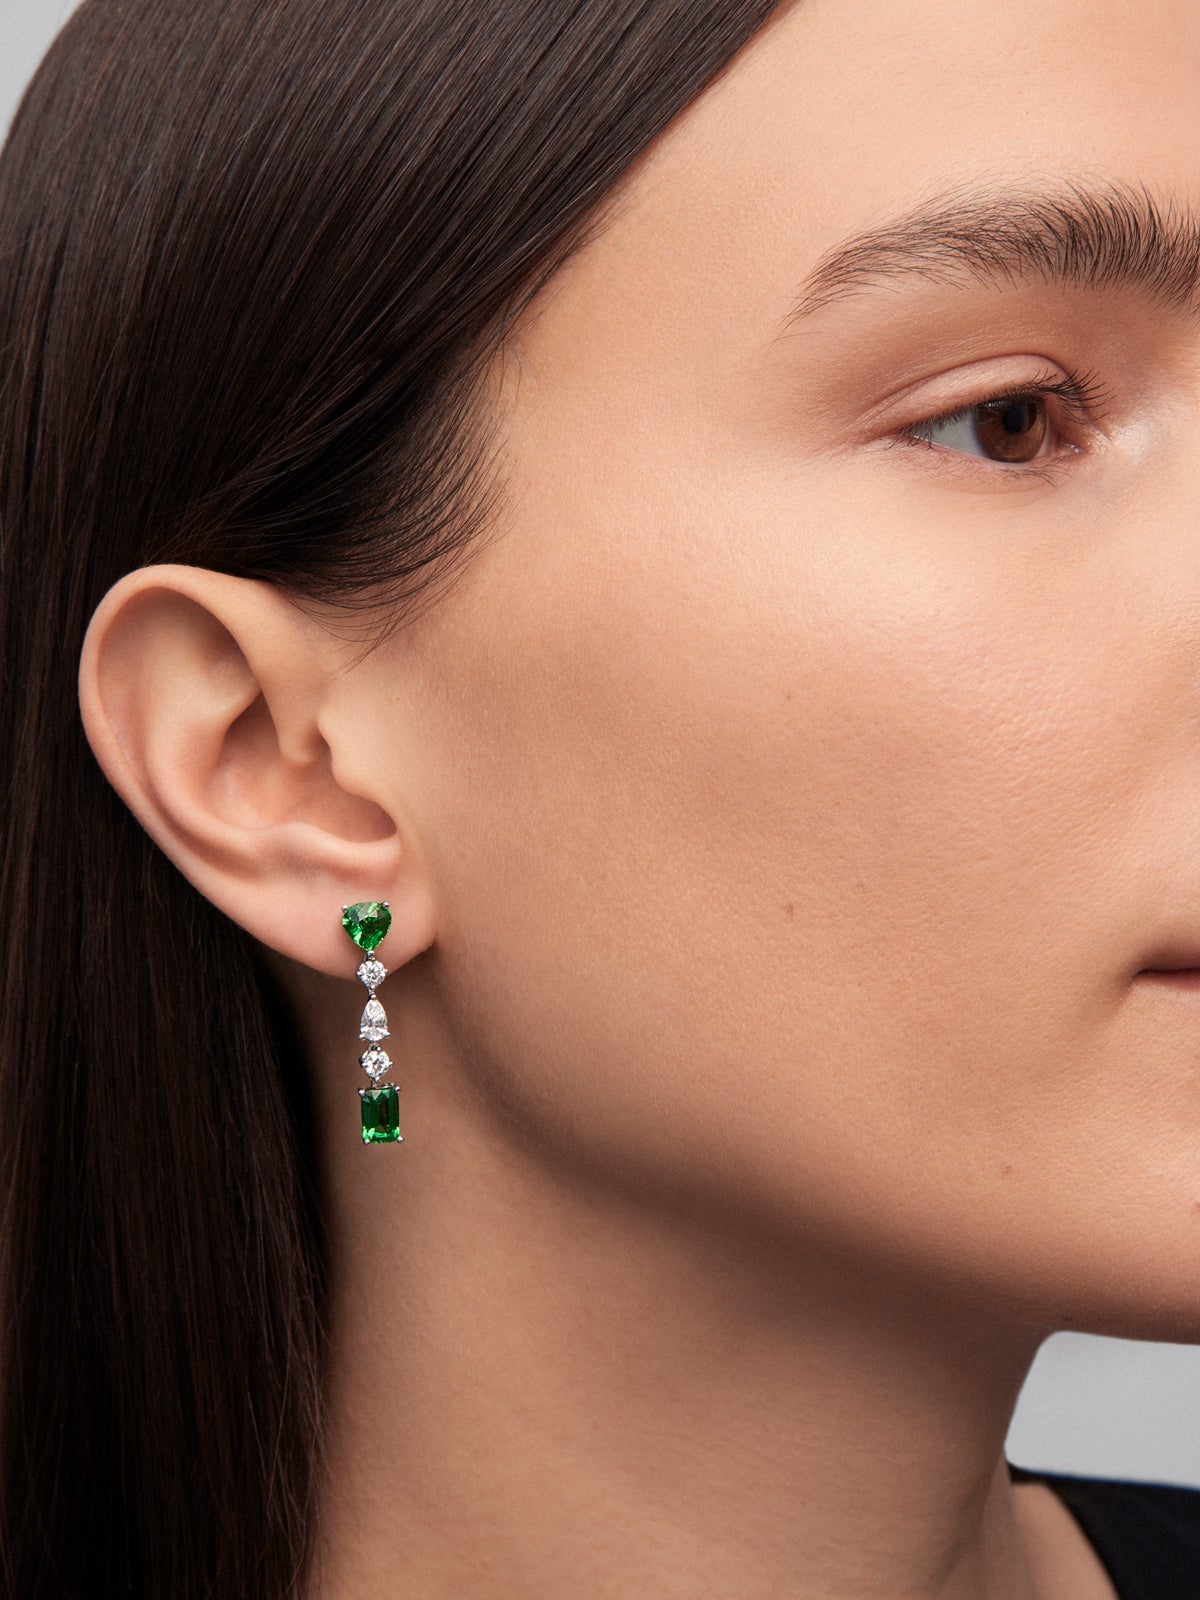 18K white gold earrings with 4 pear-cut and emerald-cut green tsavorites with a total of 8.68 cts and 6 pear-cut and brilliant-cut diamonds with a total of 0.98